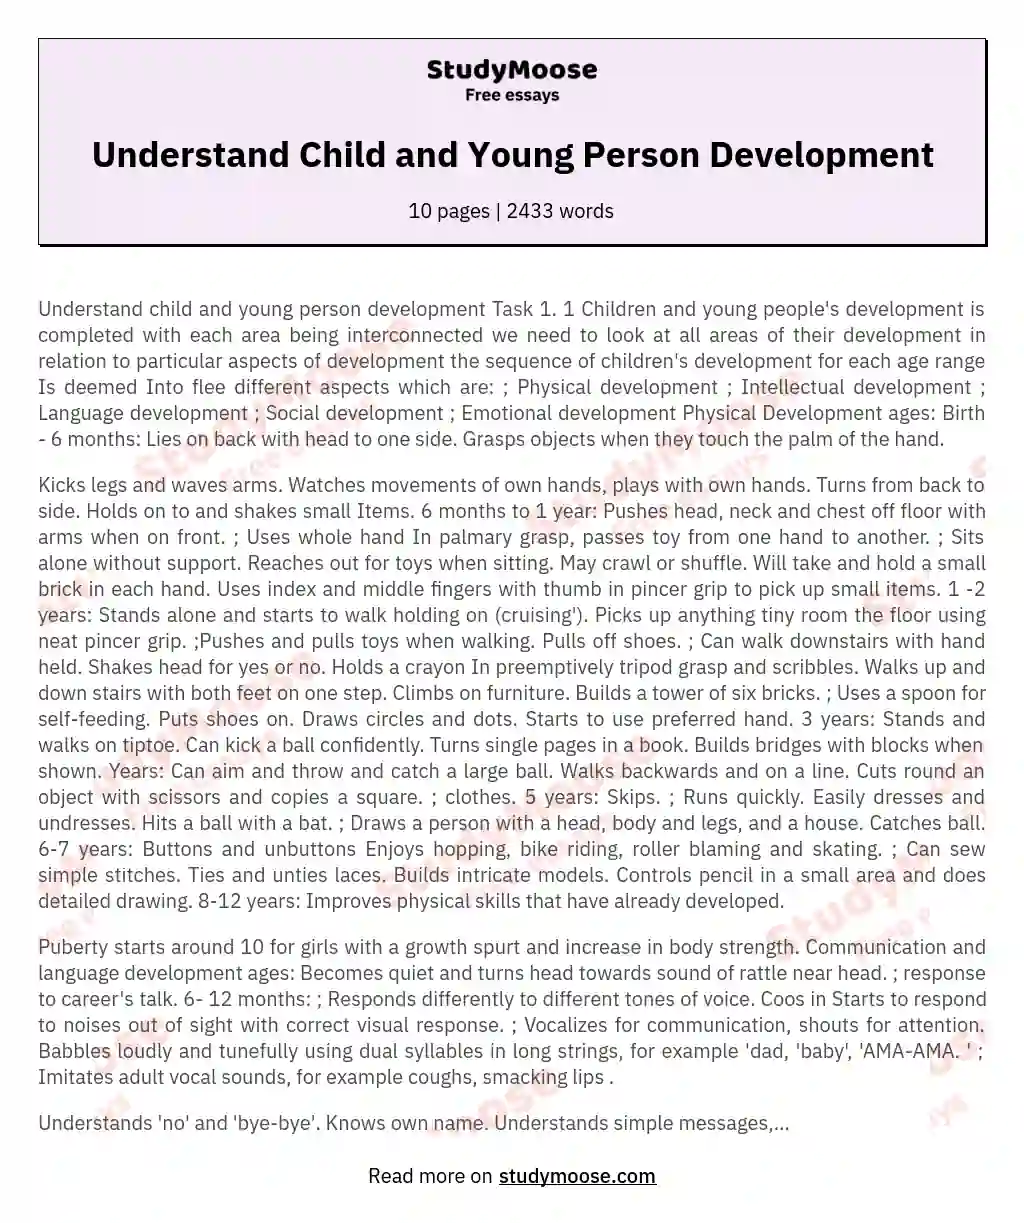 Understand Child and Young Person Development